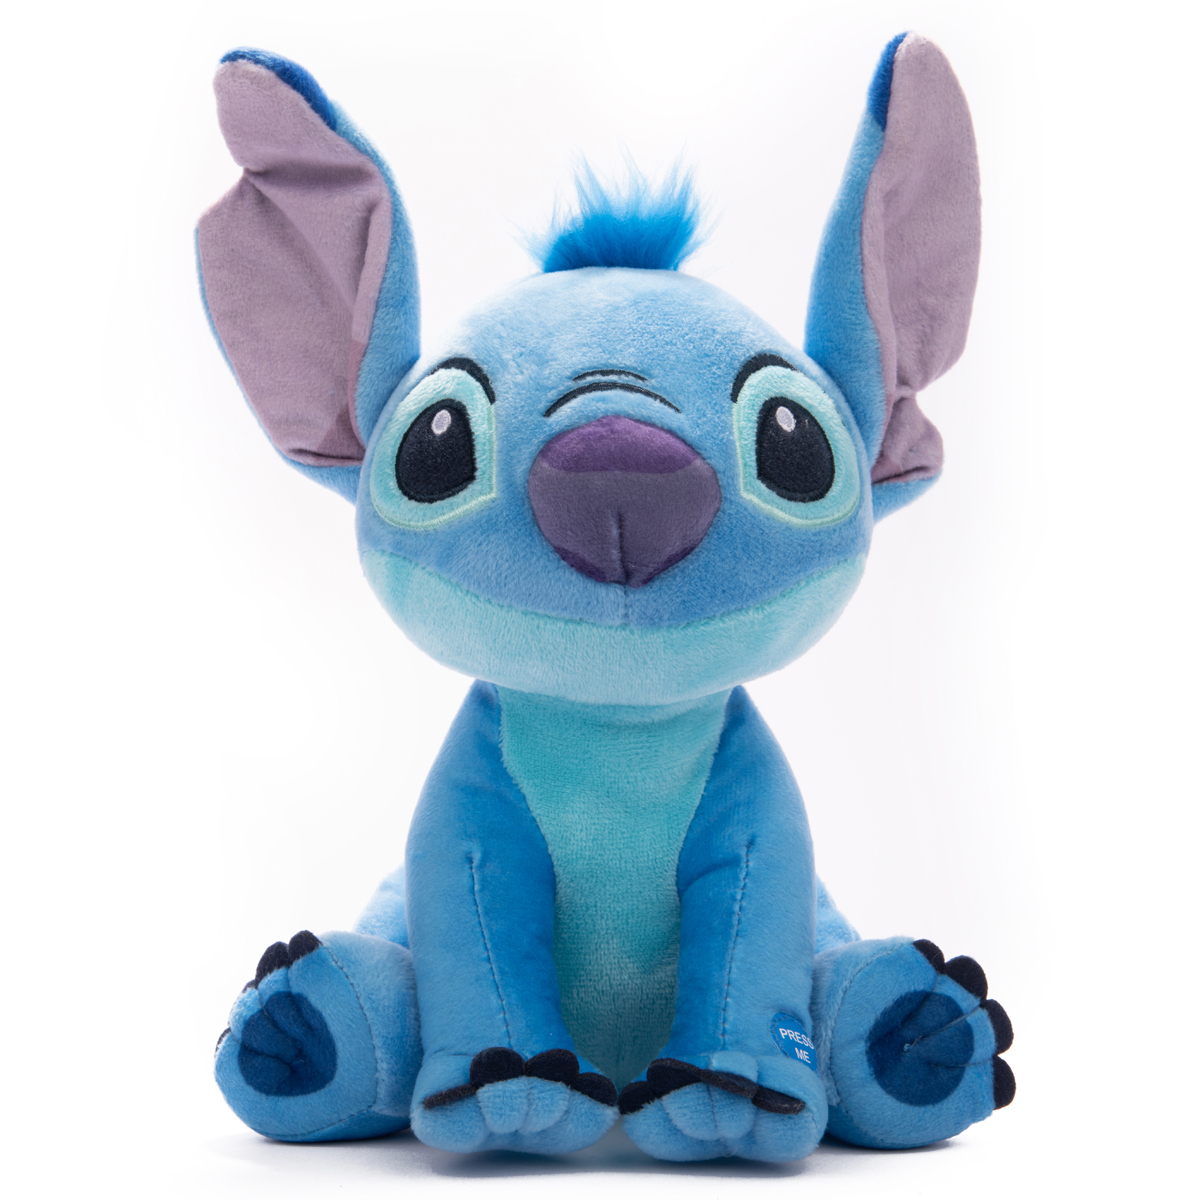 Disney Dancing & Grooving Stitch Plush with Sounds, Disney Lilo & Stitch,  Officially Licensed Kids Toys for Ages 3 Up by Just Play